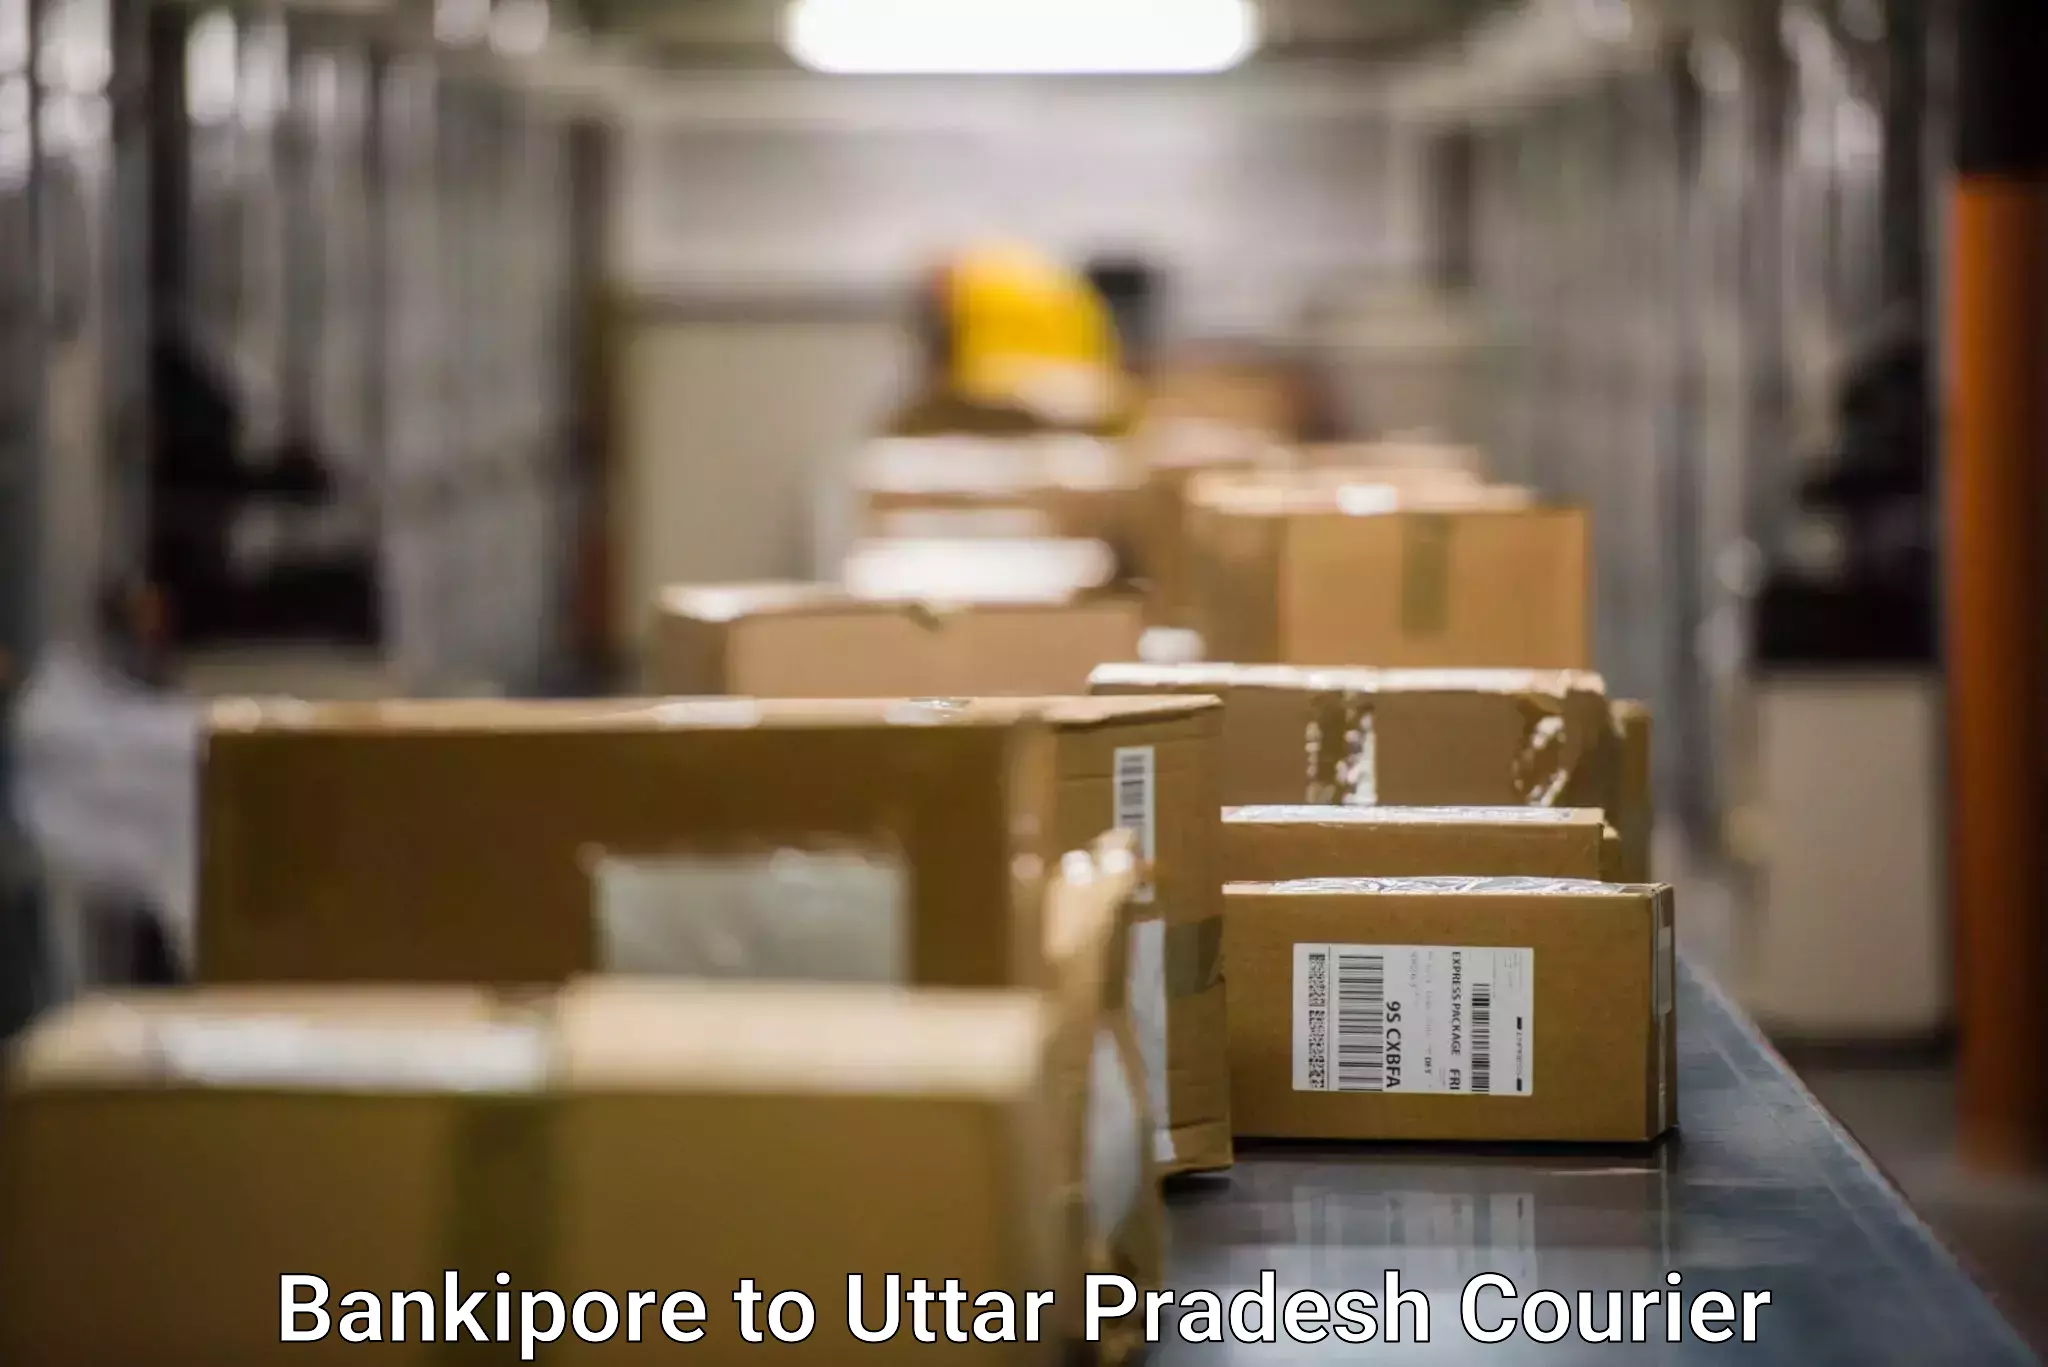 Expedited shipping methods in Bankipore to Sirathu